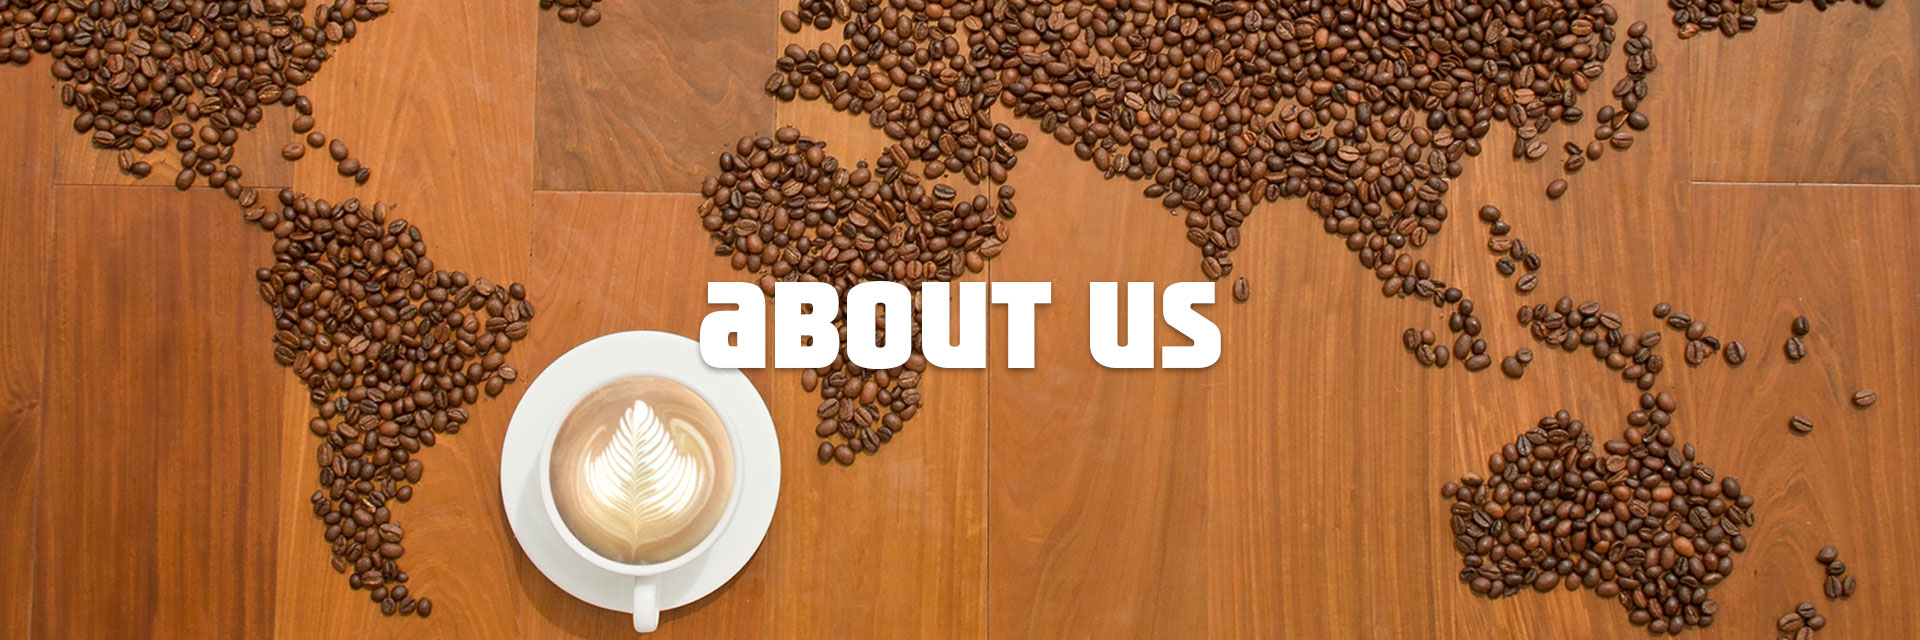 Café Coffe Day About us Banner